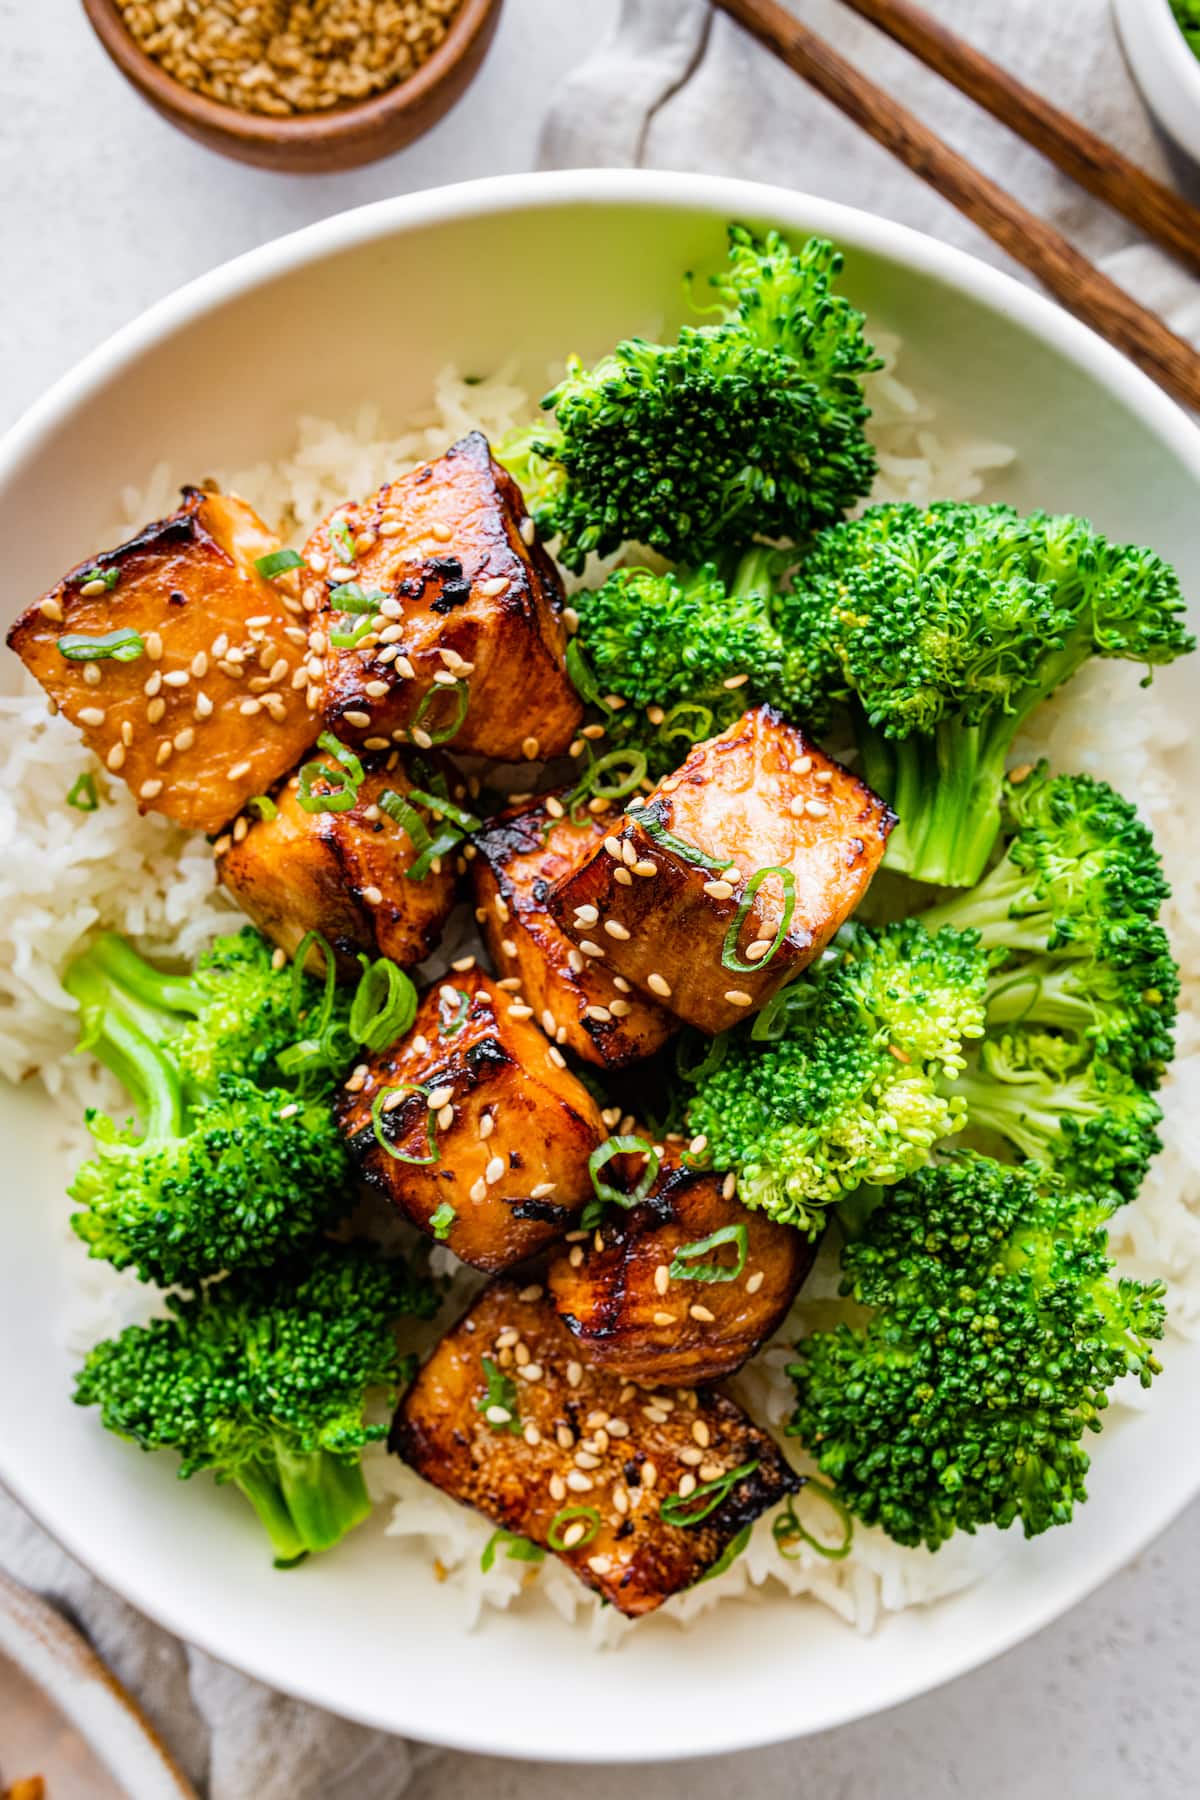 Air fryer salmon bites in a bowl with broccoli and rice.